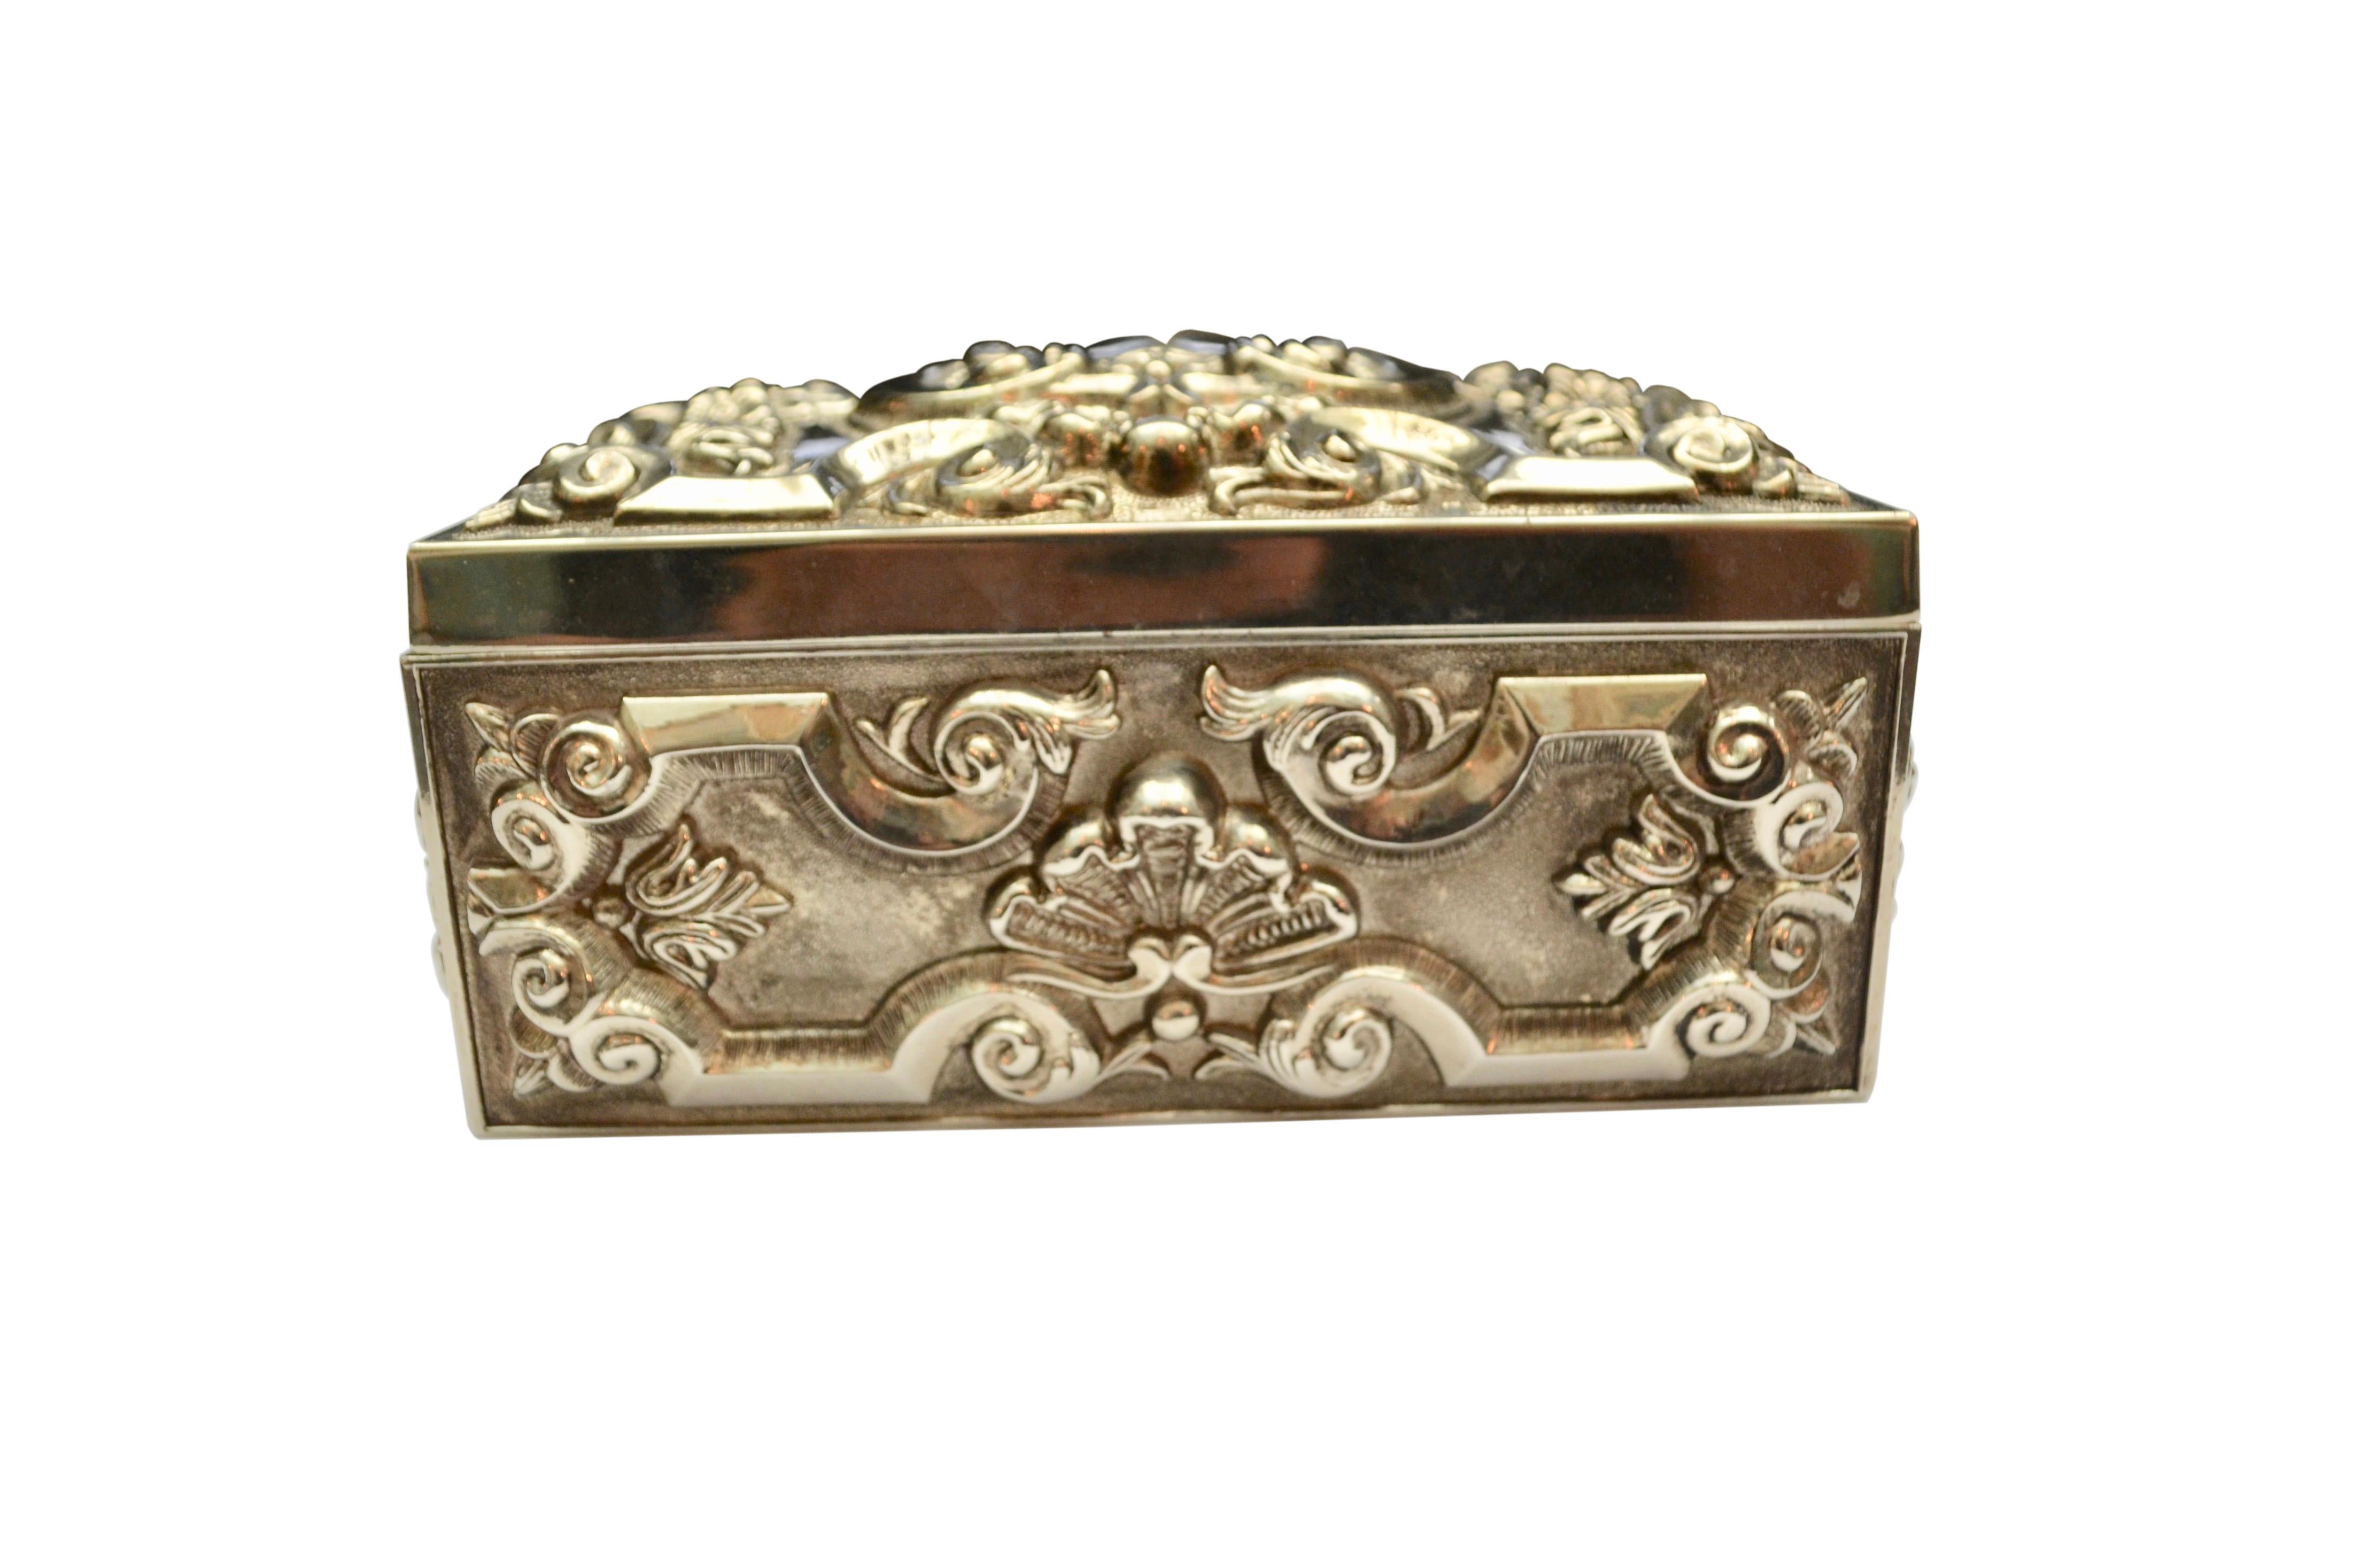 Siiver Plated Renaissance Revival Style Jewellery Box  In Good Condition For Sale In Vancouver, British Columbia